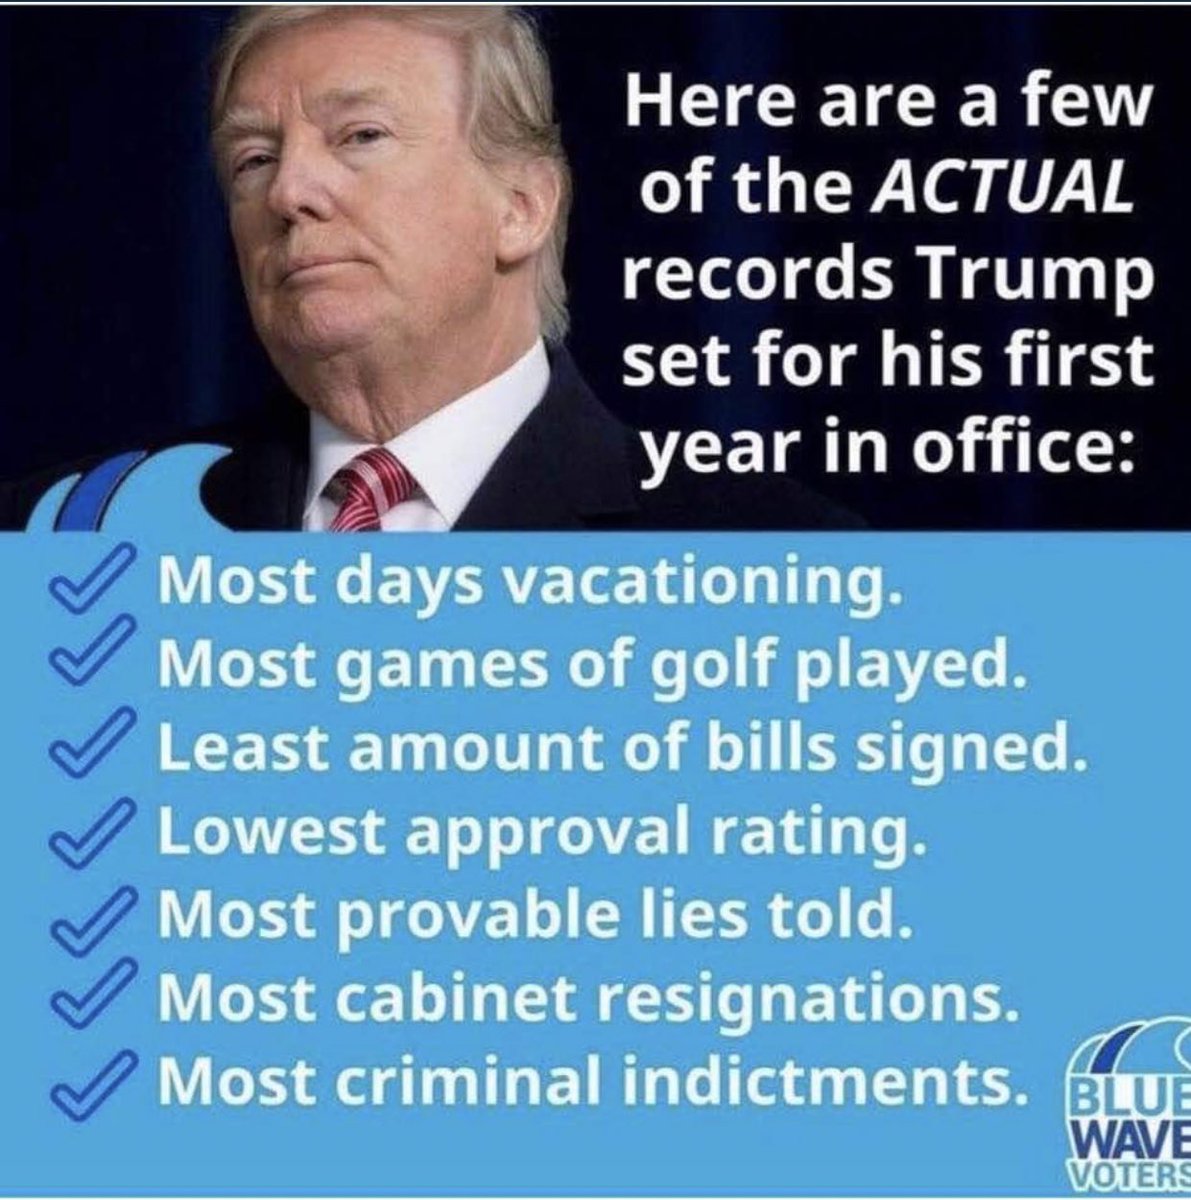 trump record meme - Here are a few of the Actual records Trump set for his first year in office > Most days vacationing. Most games of golf played. Least amount of bills signed. > Lowest approval rating. Most provable lies told. Most cabinet resignations.